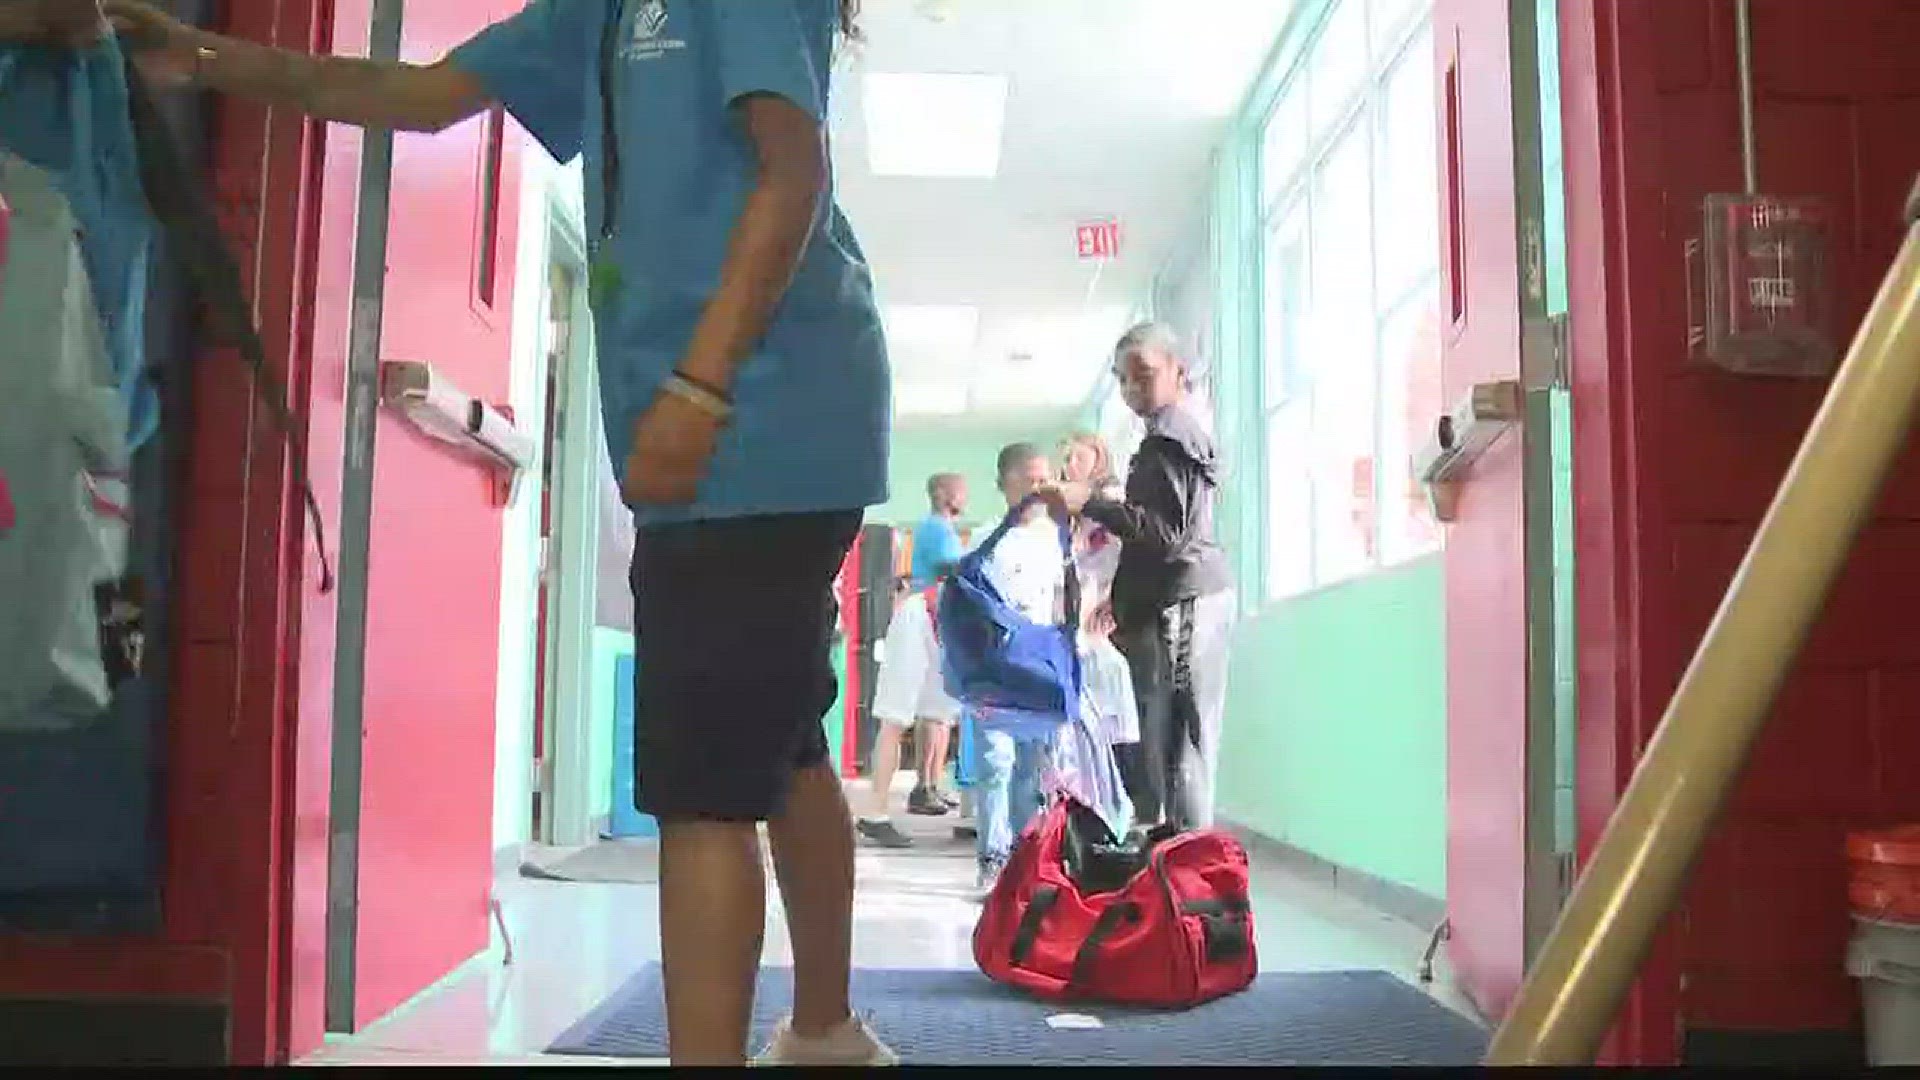 2 Pack a Backpack: KeyBank makes backpack donation